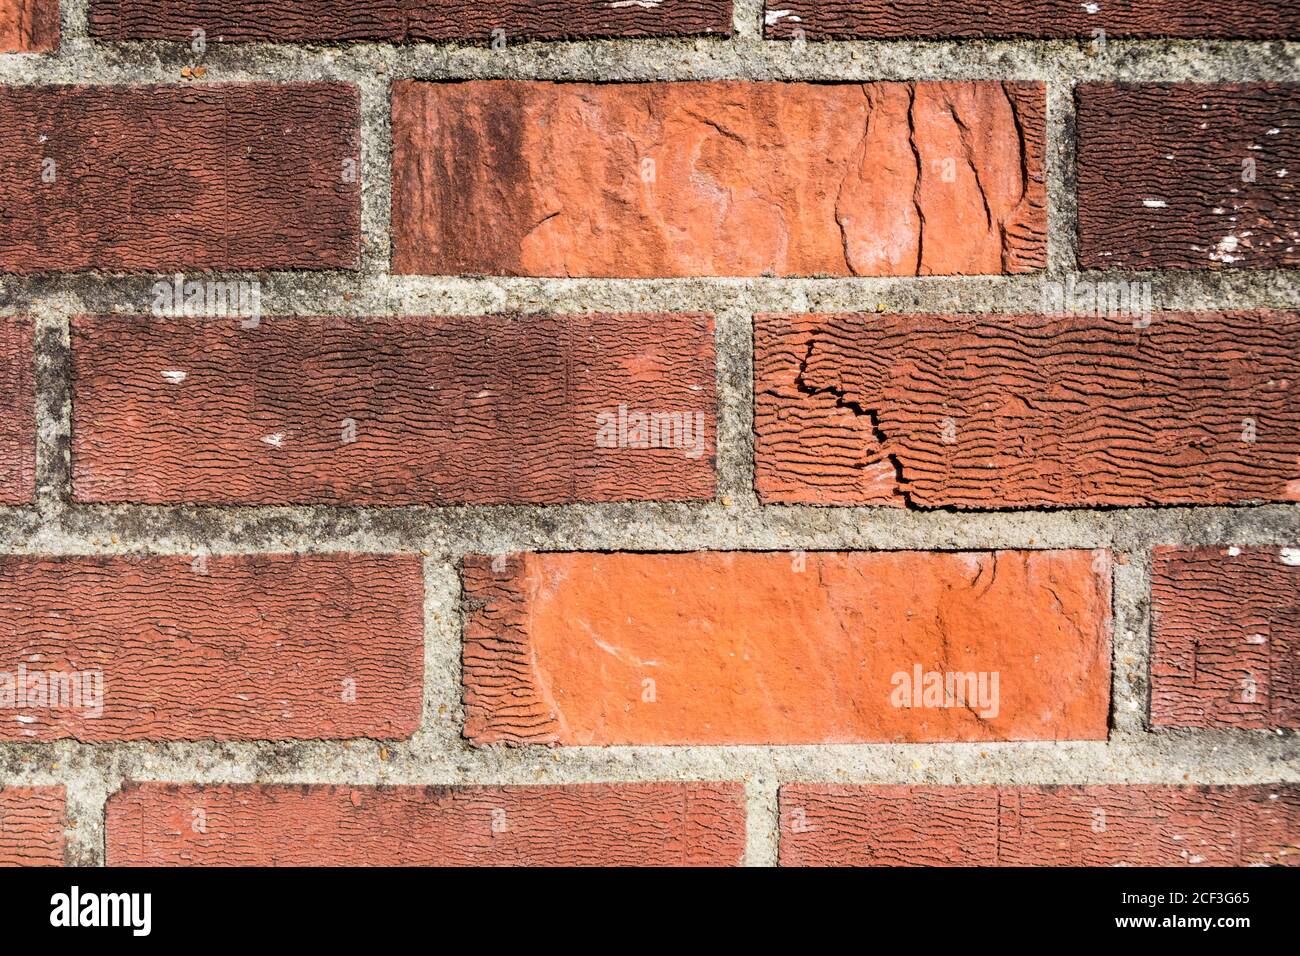 Spalling Brickwork High Resolution Stock Photography and Images